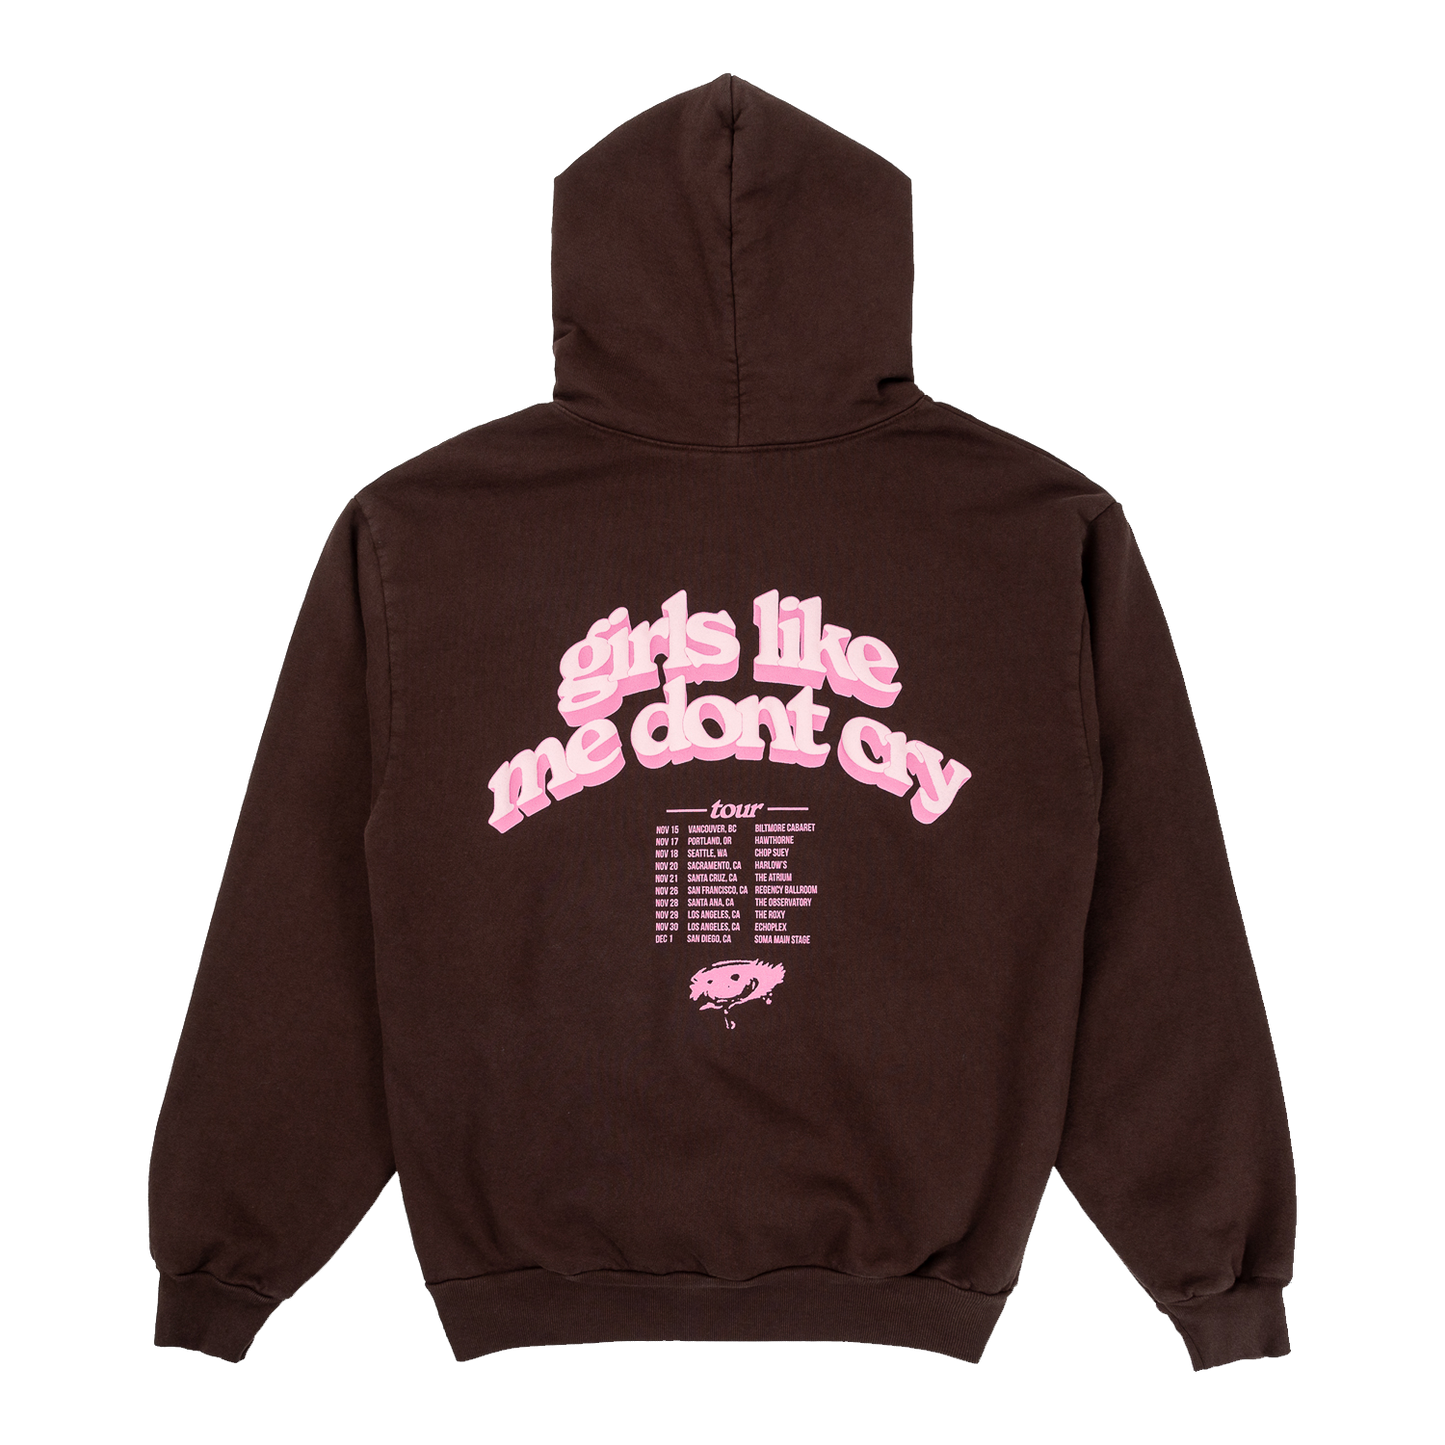 girls like me don't cry west coast tour hoodie (brown)